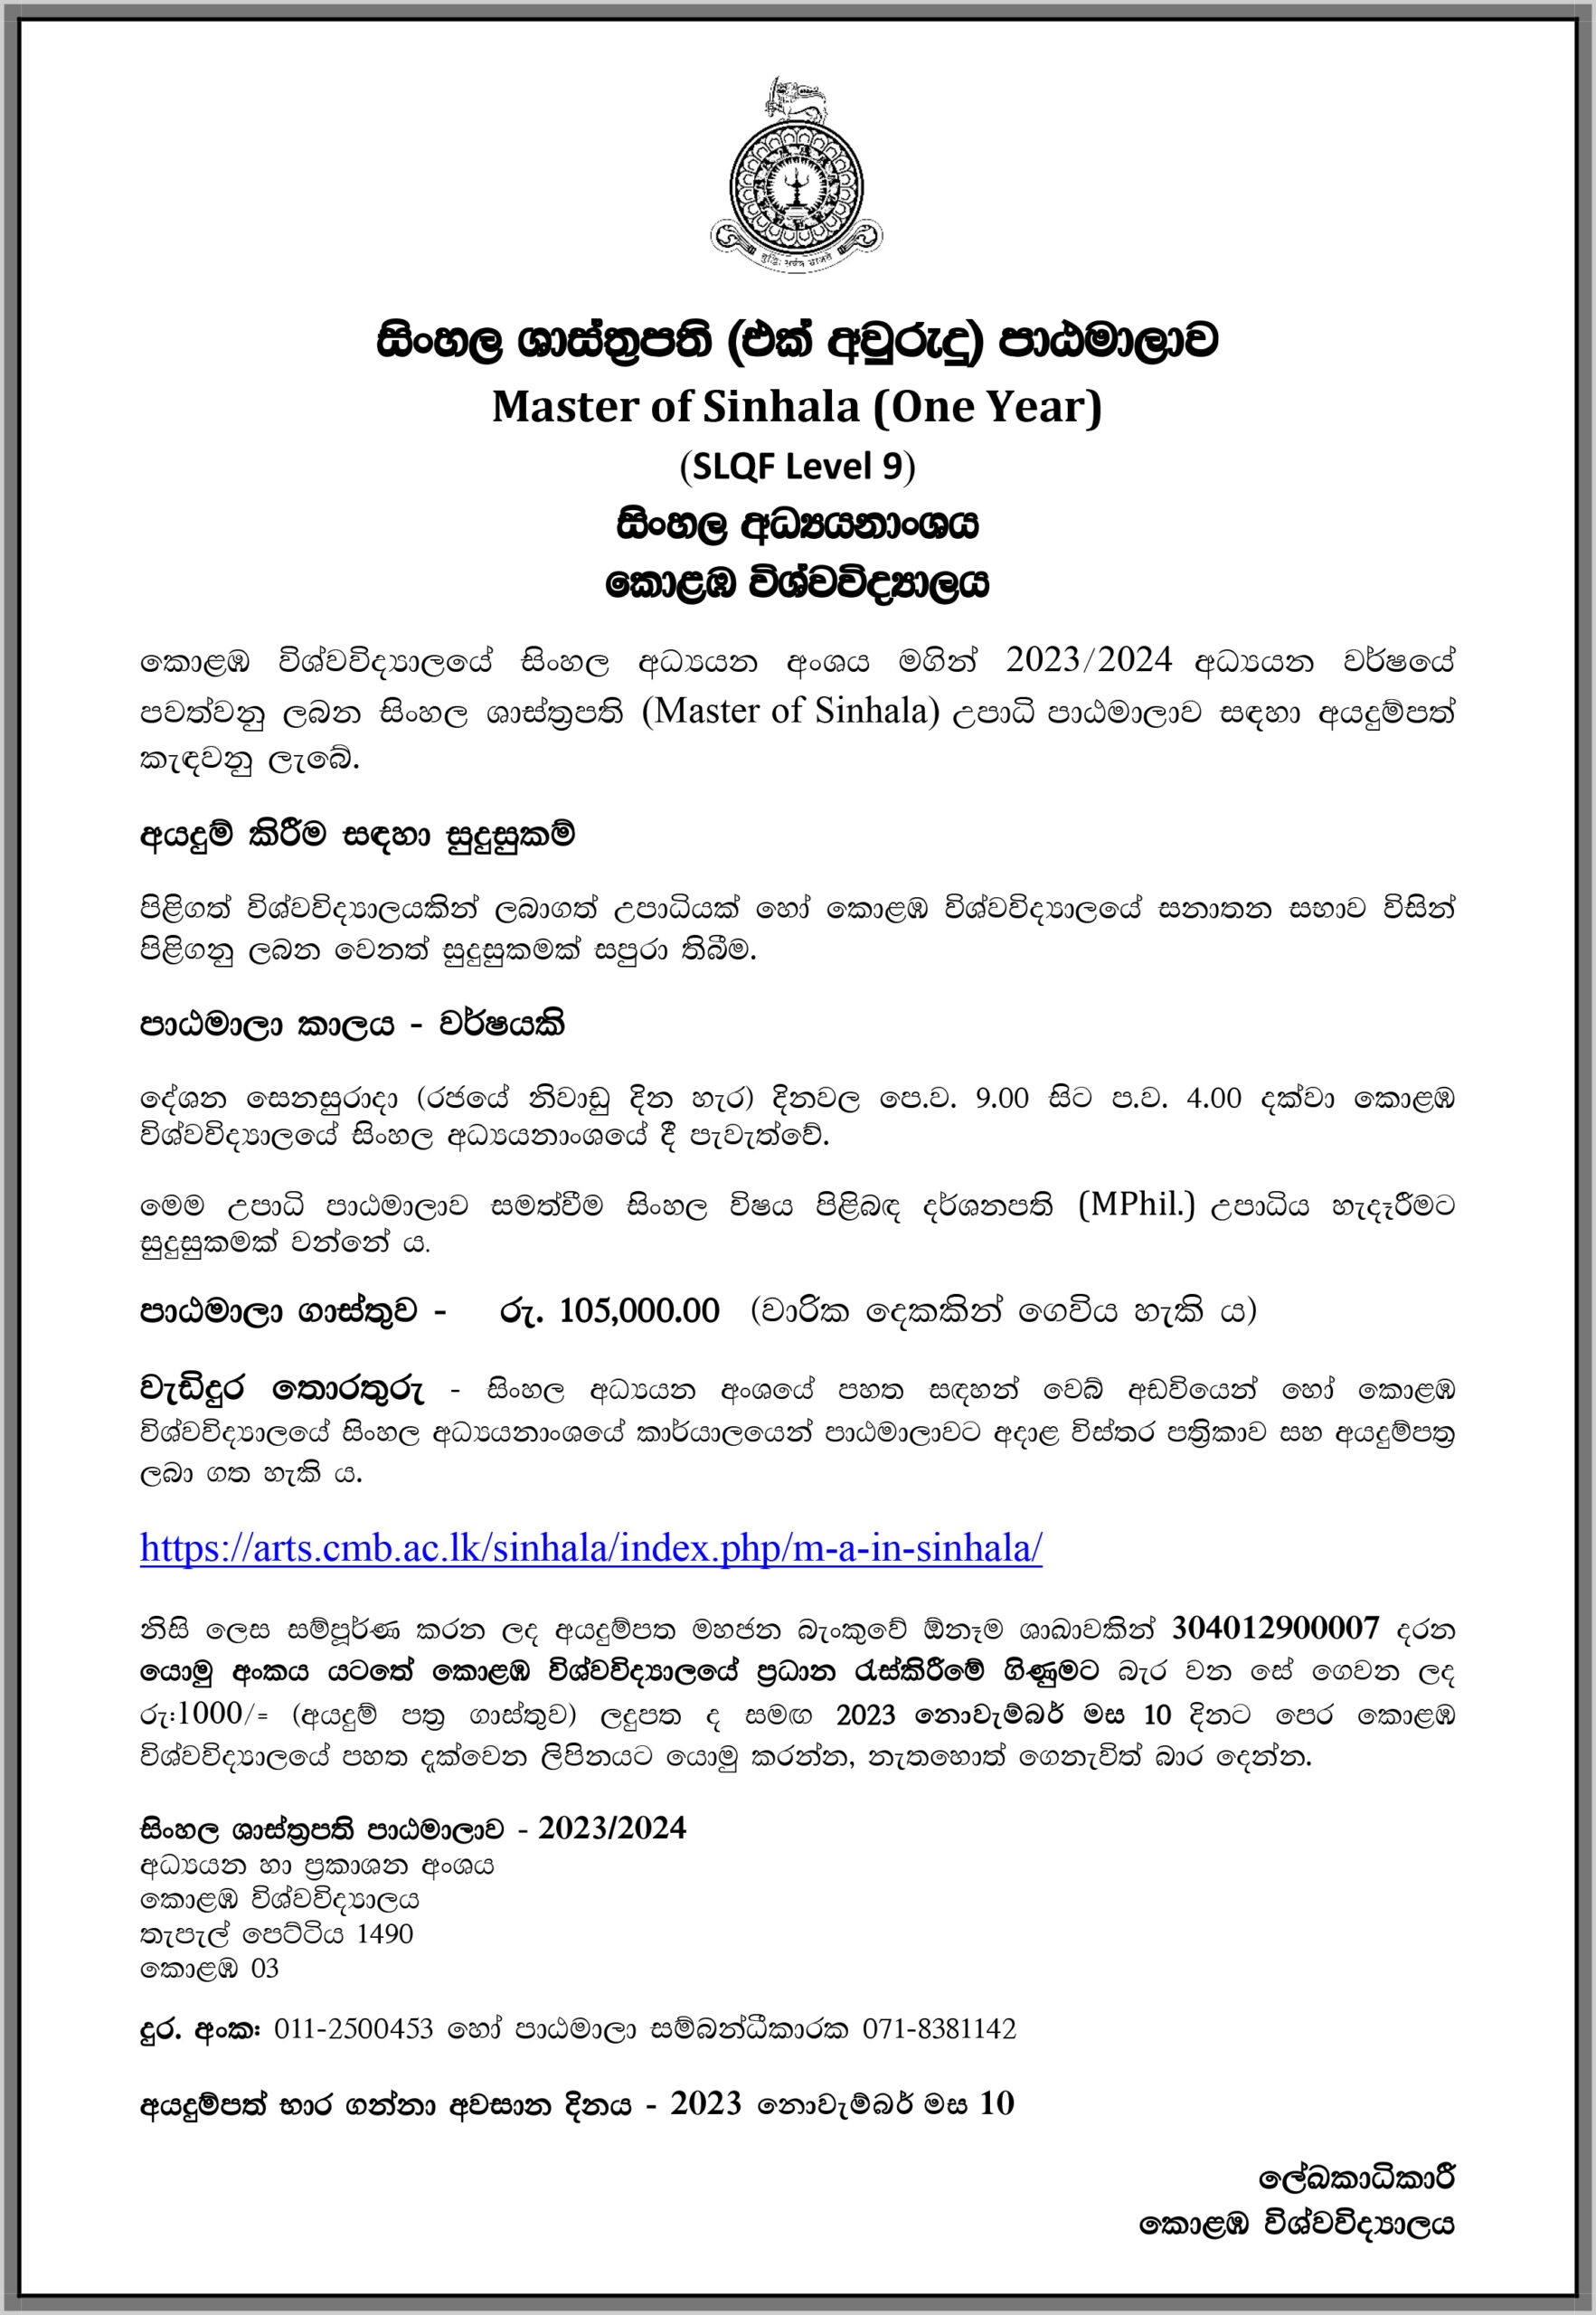 Applications for Master of Sinhala 2023/2024 Programme